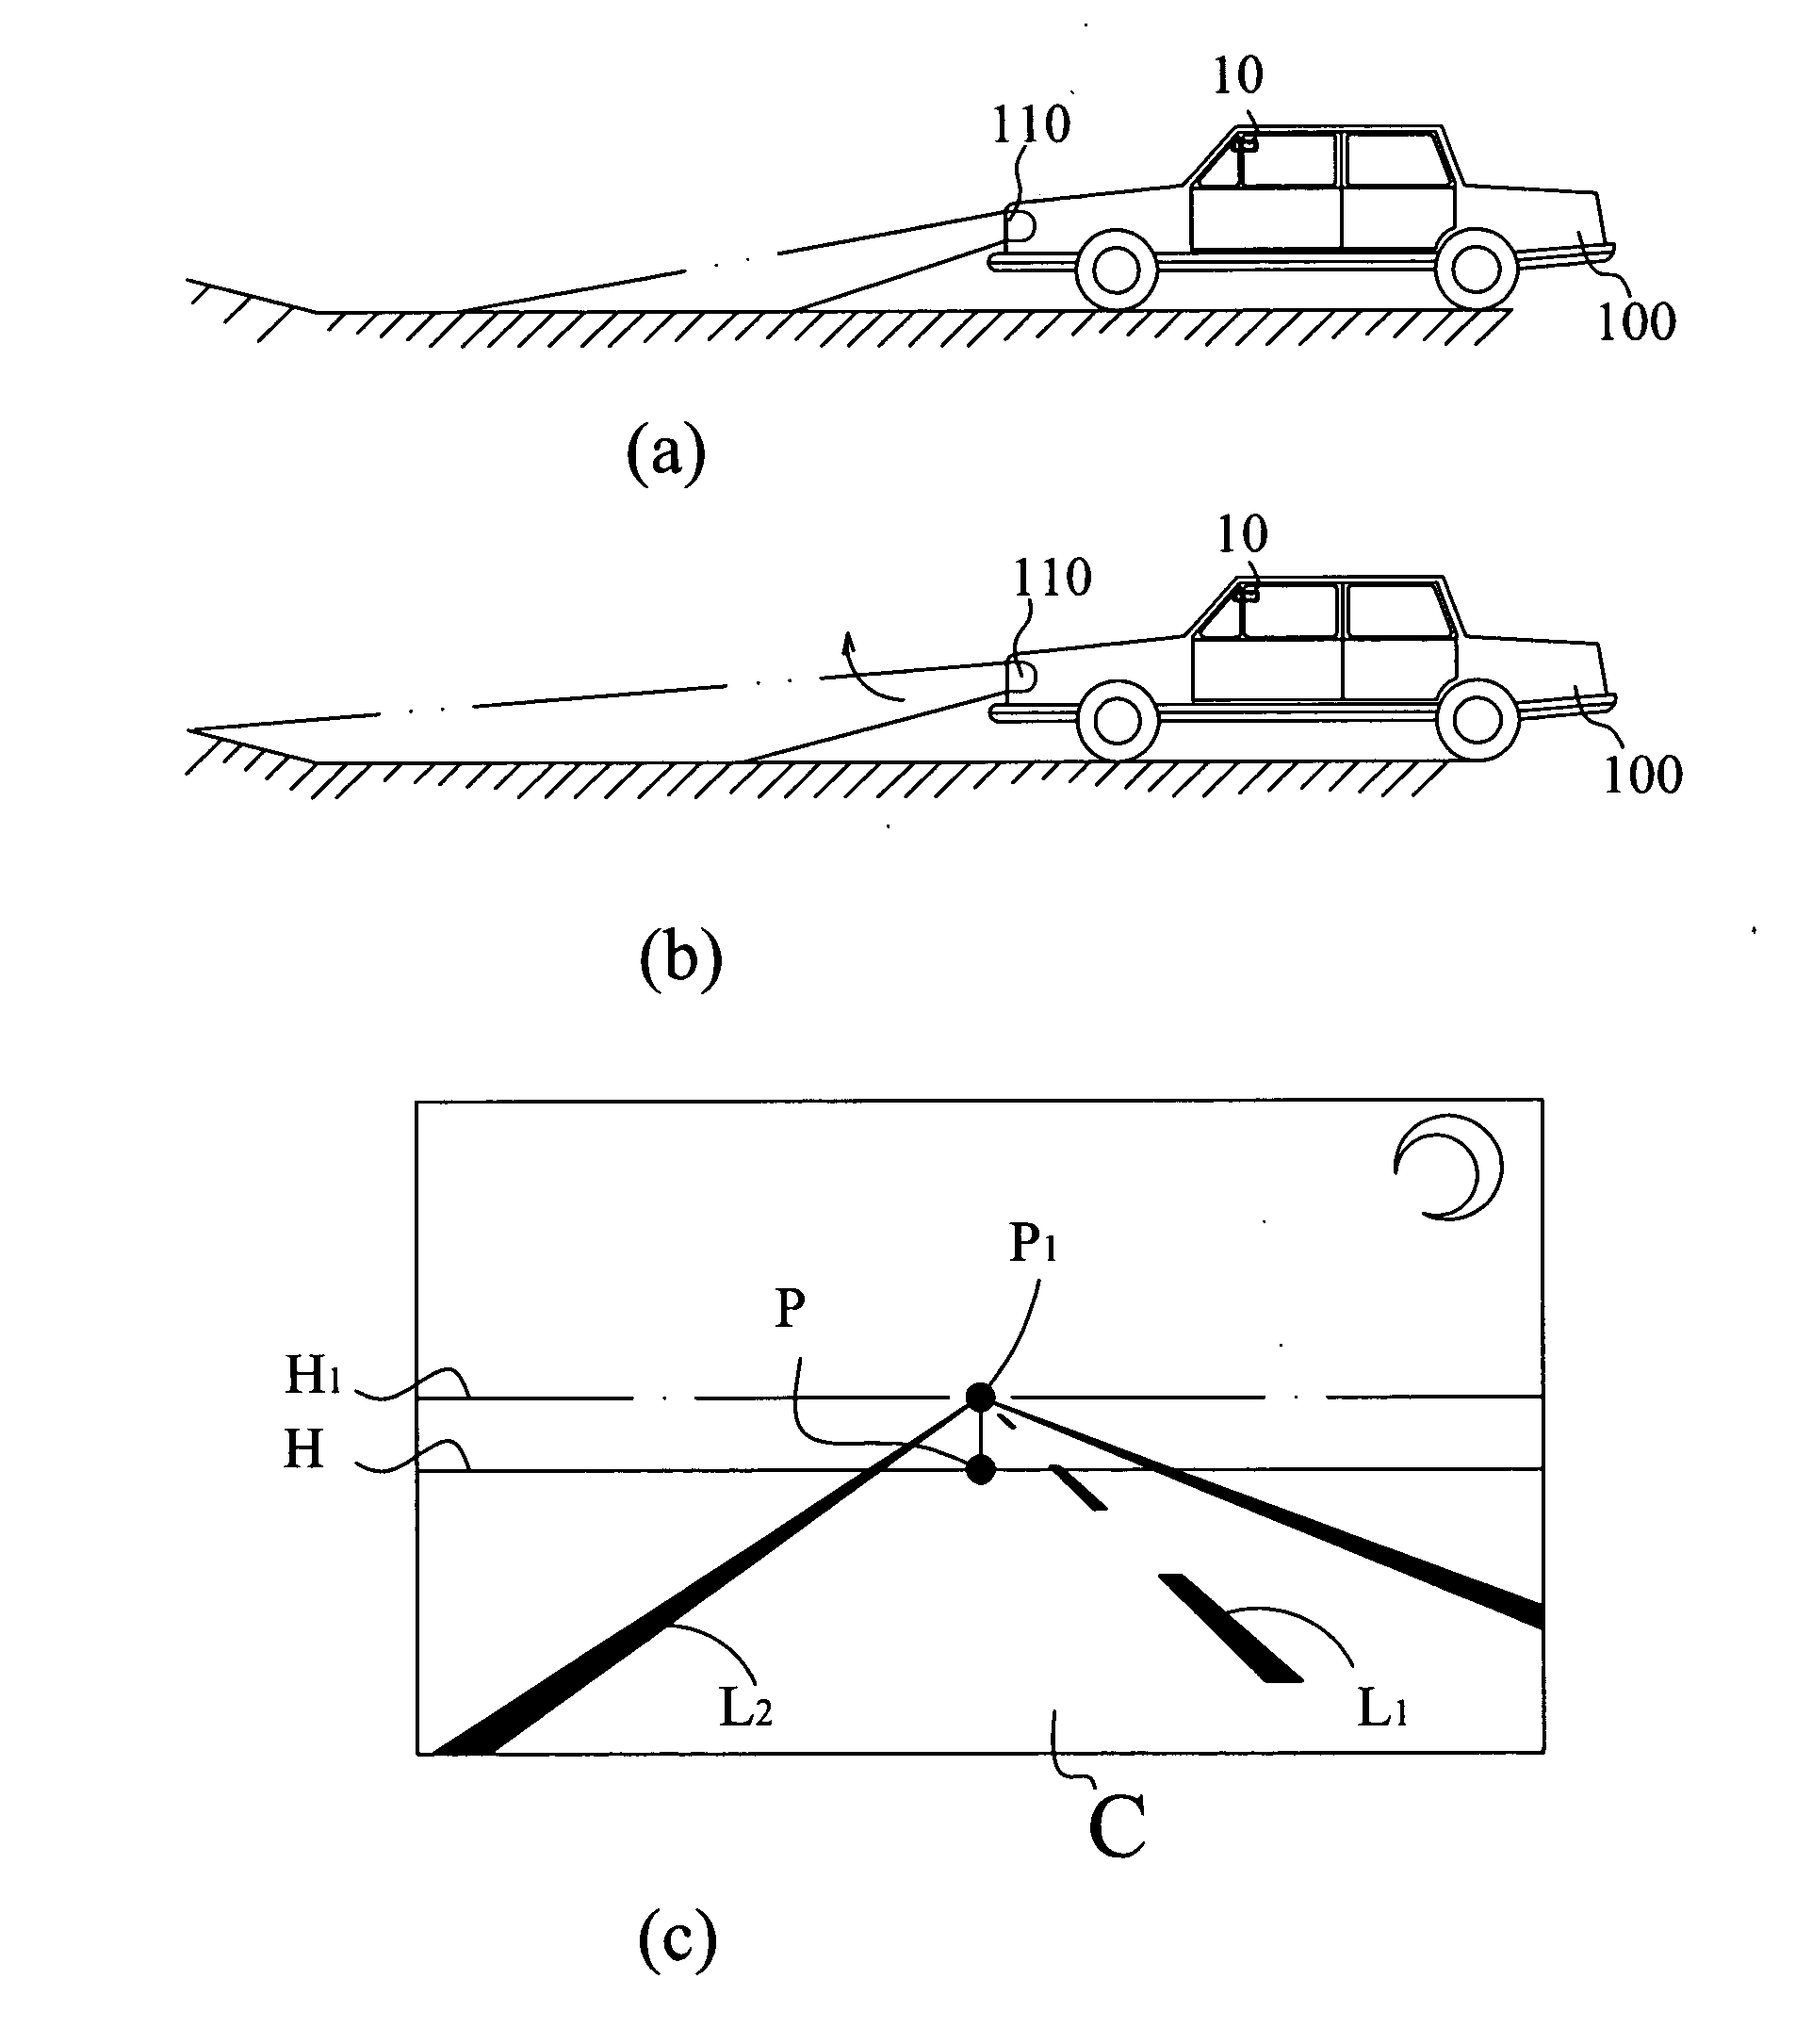 Vehicular tilt-sensing method and automatic headlight leveling system using the same